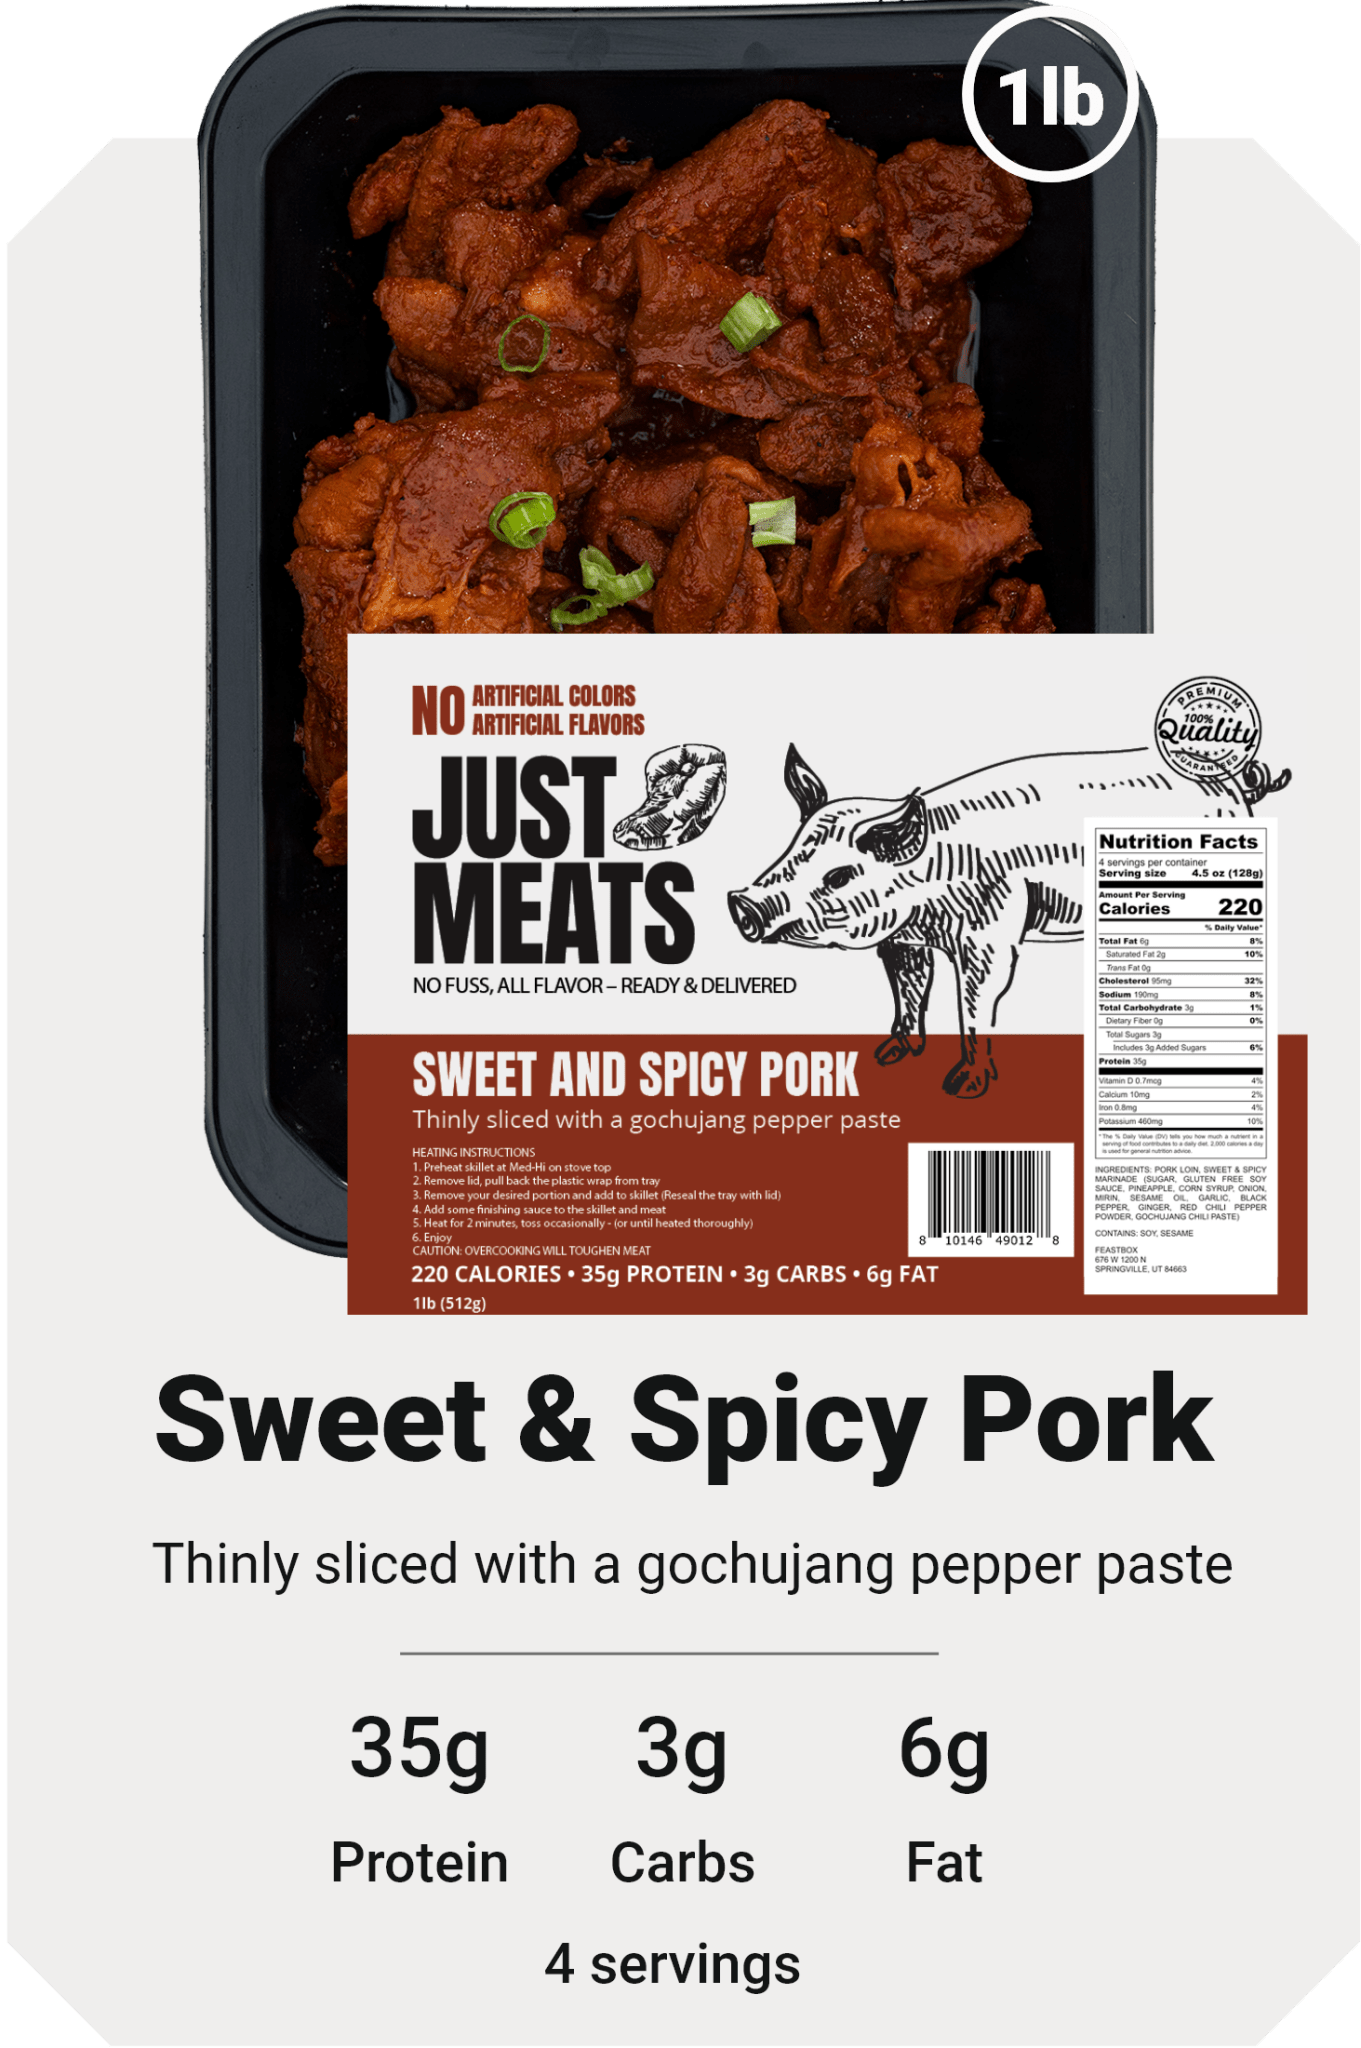 Sweet and Spicy Pork